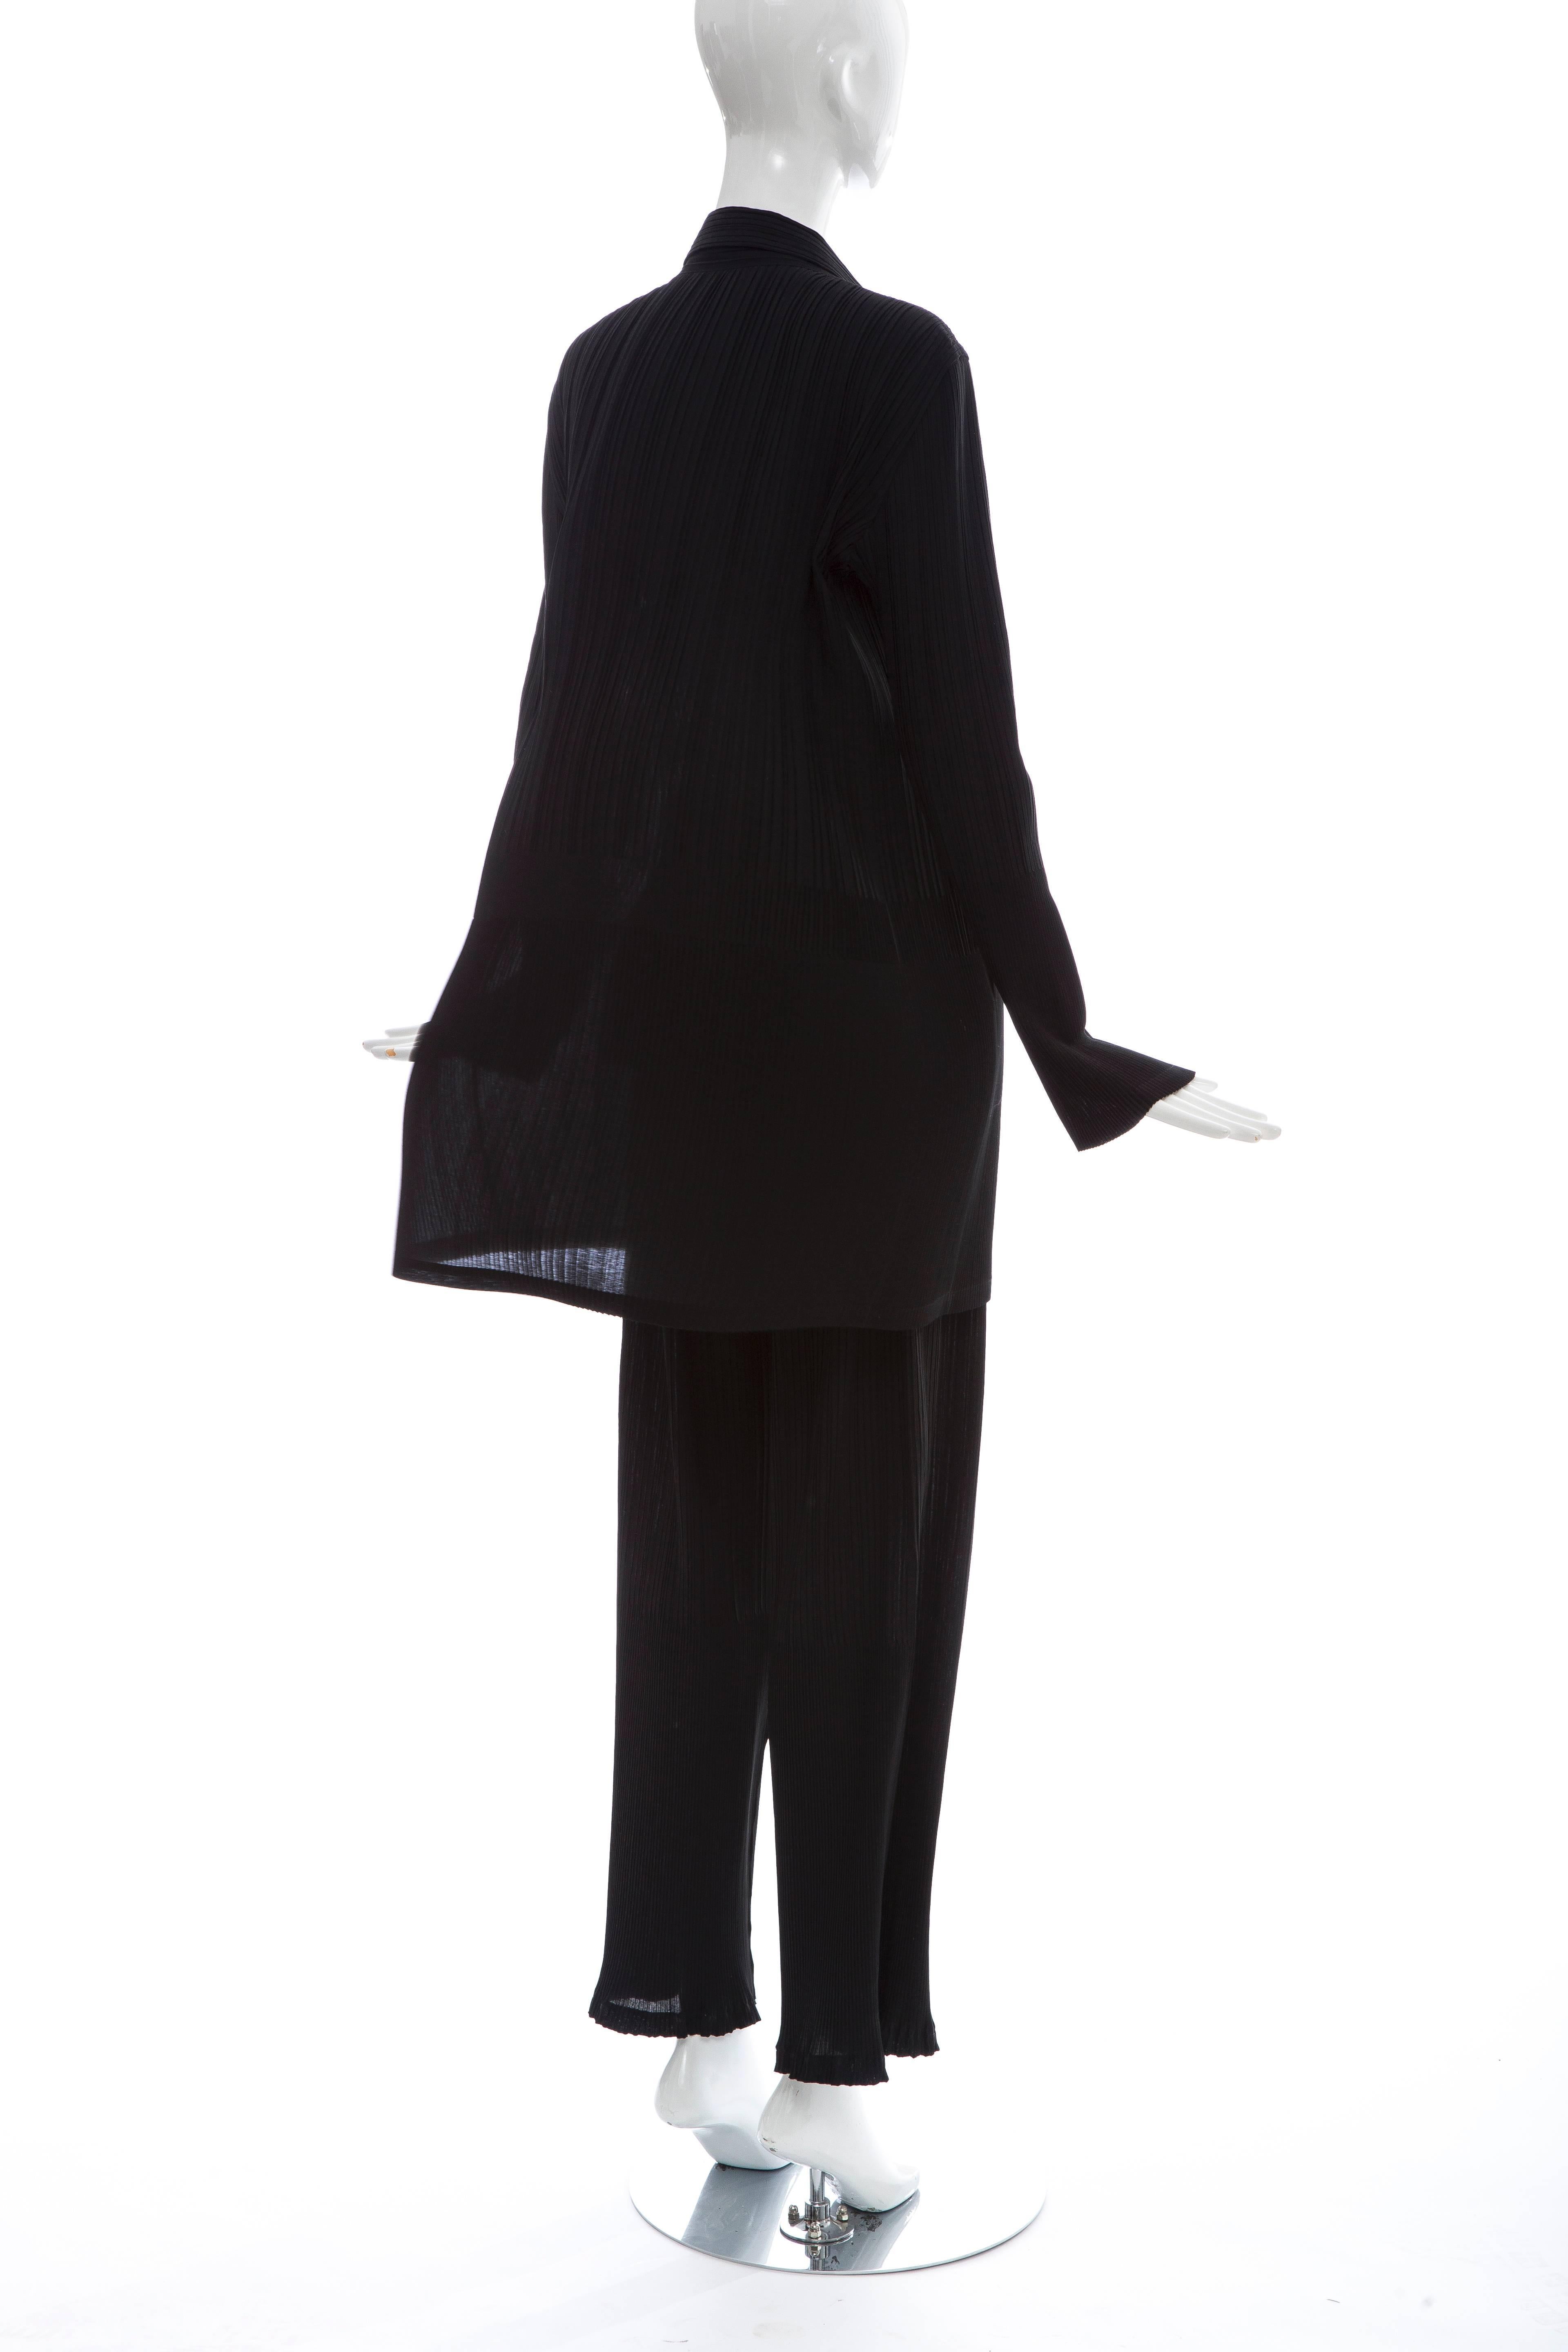 Issey Miyake Black Pleated Polyester Button Front Pant Suit, Circa 1990's For Sale 2